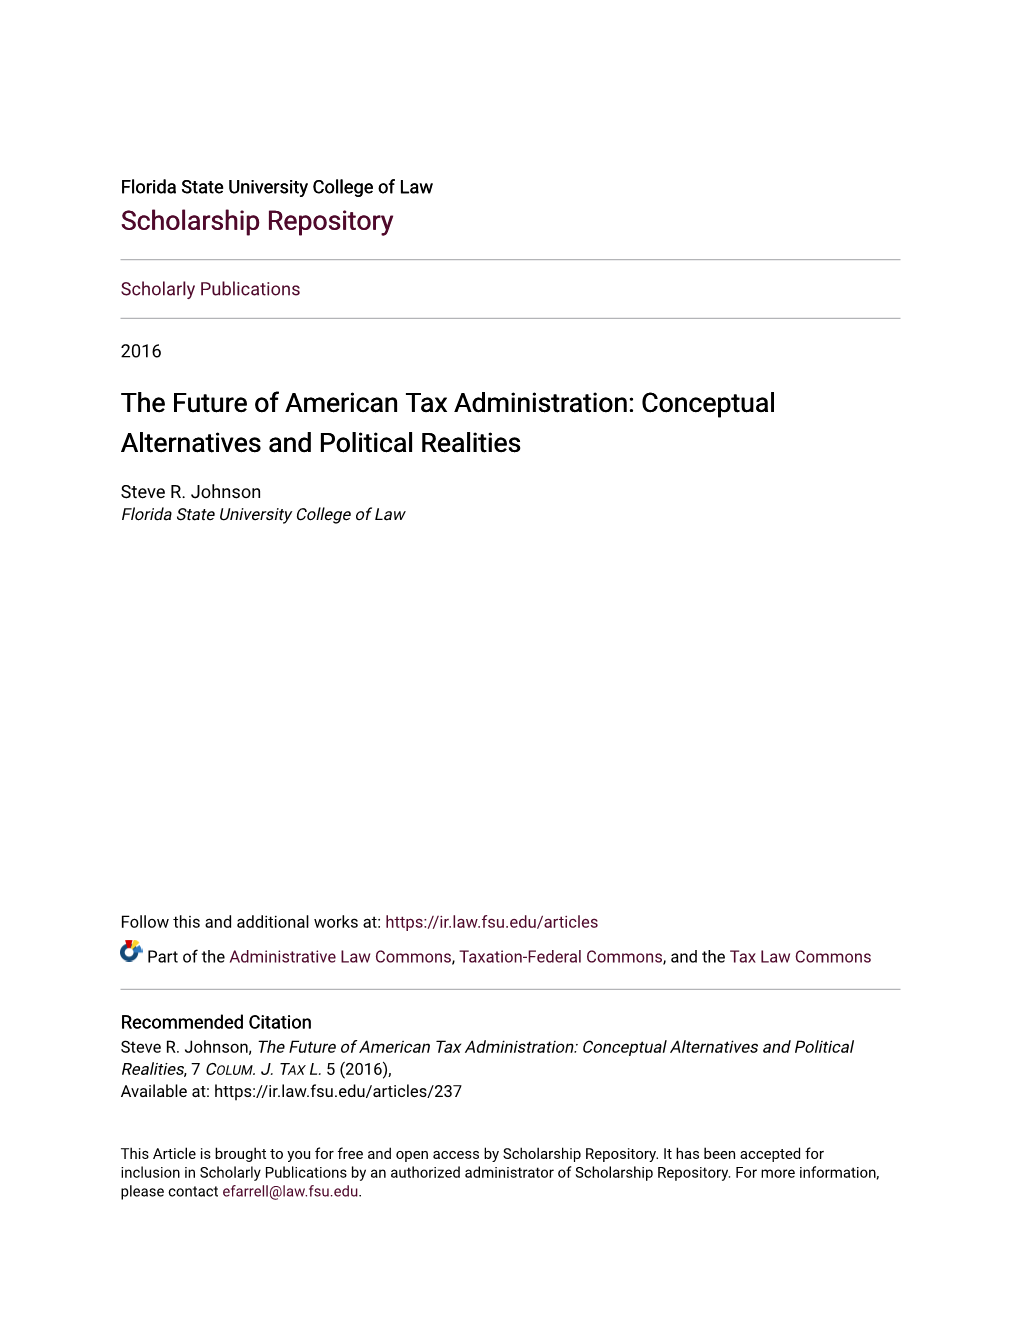 The Future of American Tax Administration: Conceptual Alternatives and Political Realities